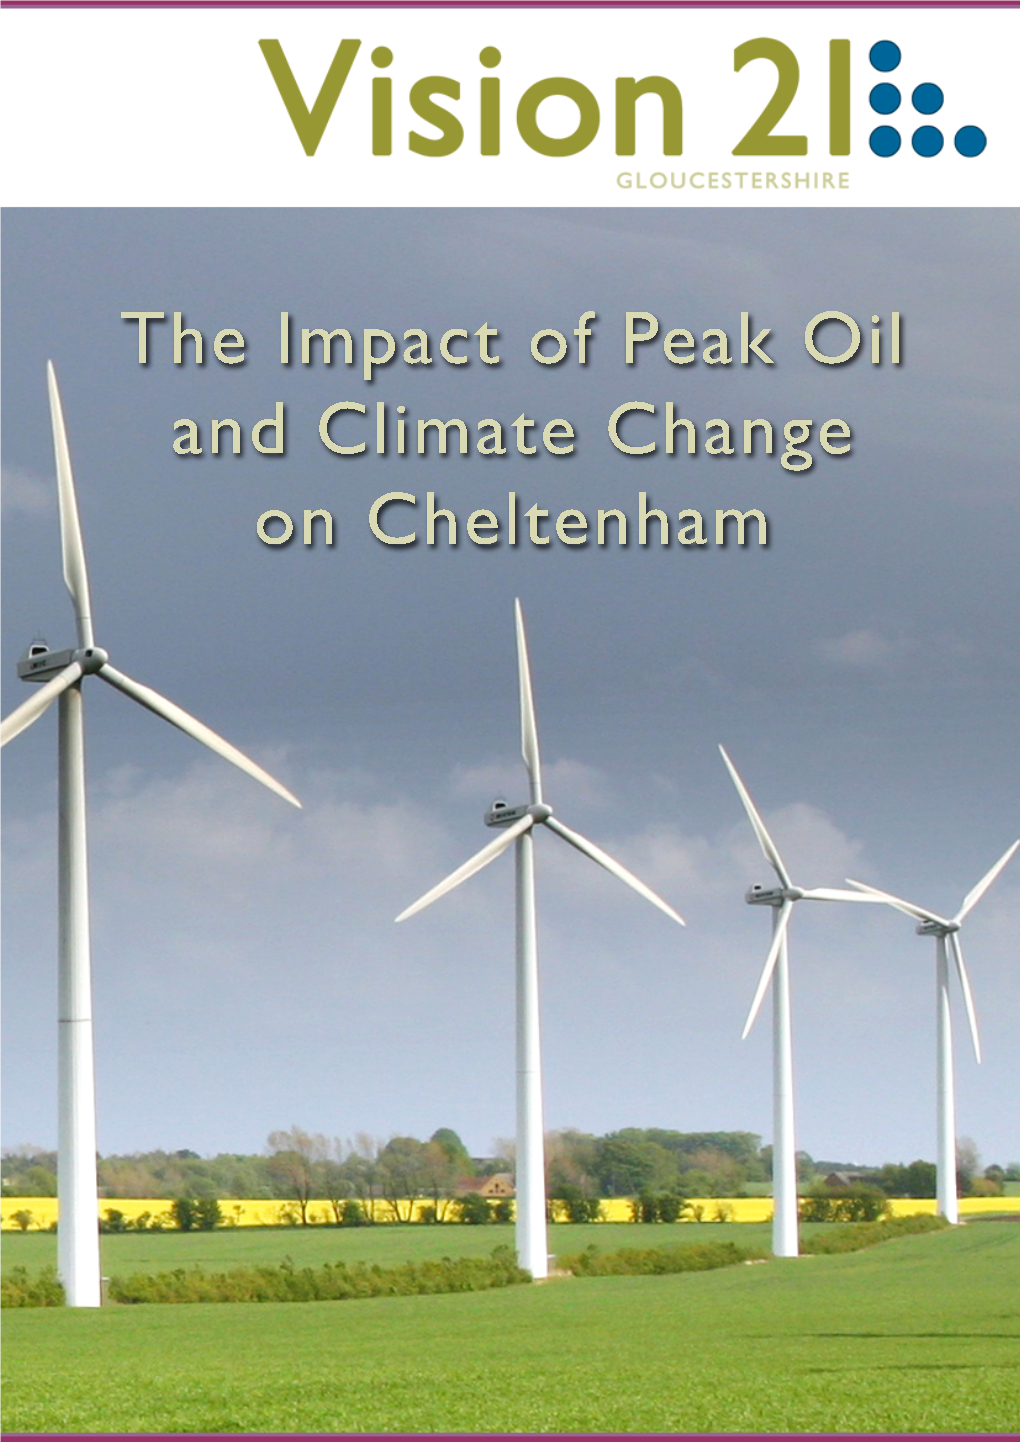 The Impact of Climate Change and Peak Oil Will Be Comprehensive with Interconnected Environmental, Social and Economic Effects